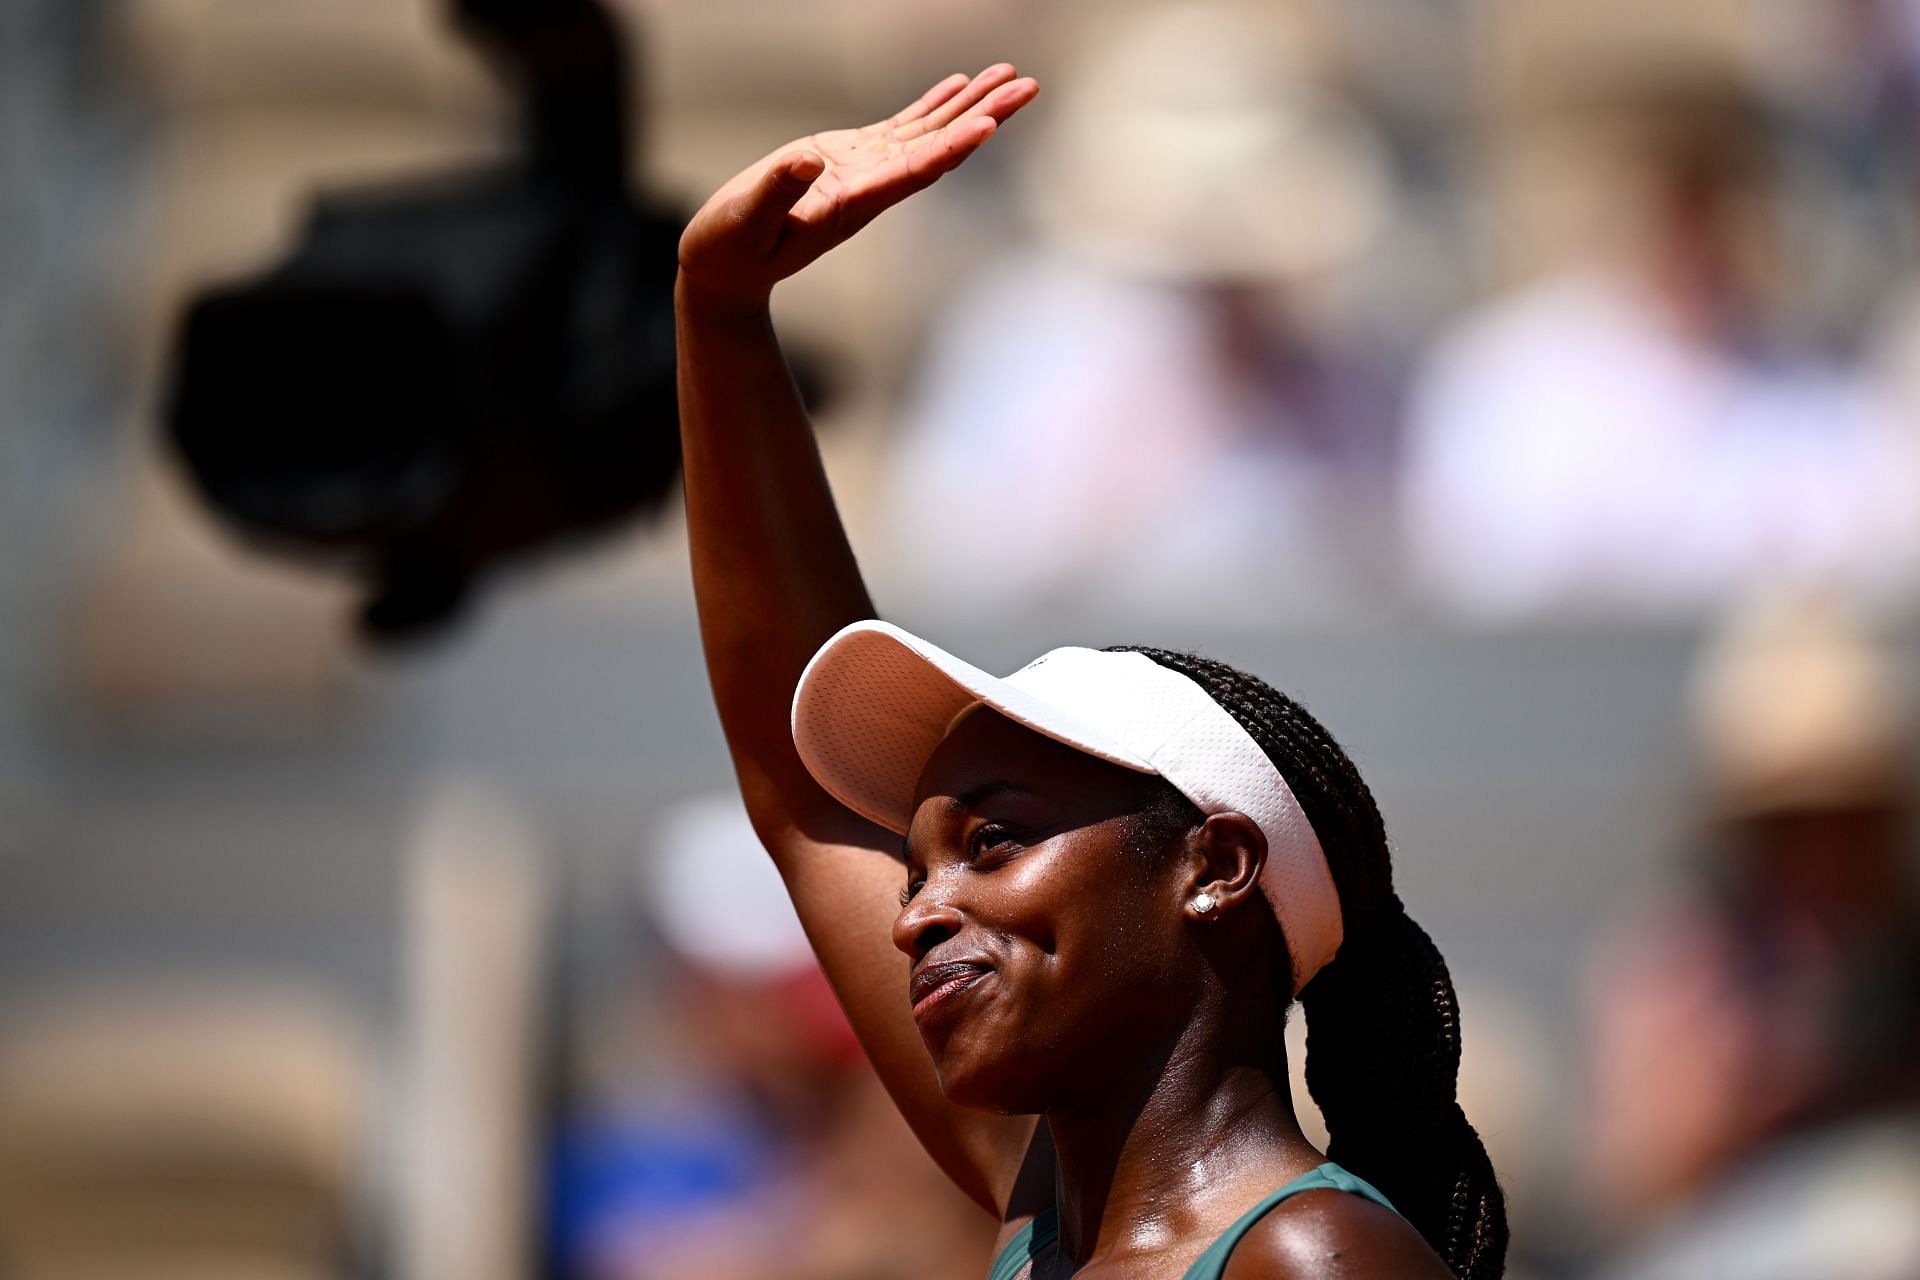 Sloane Stephens after winning her first-round match at the French Open.